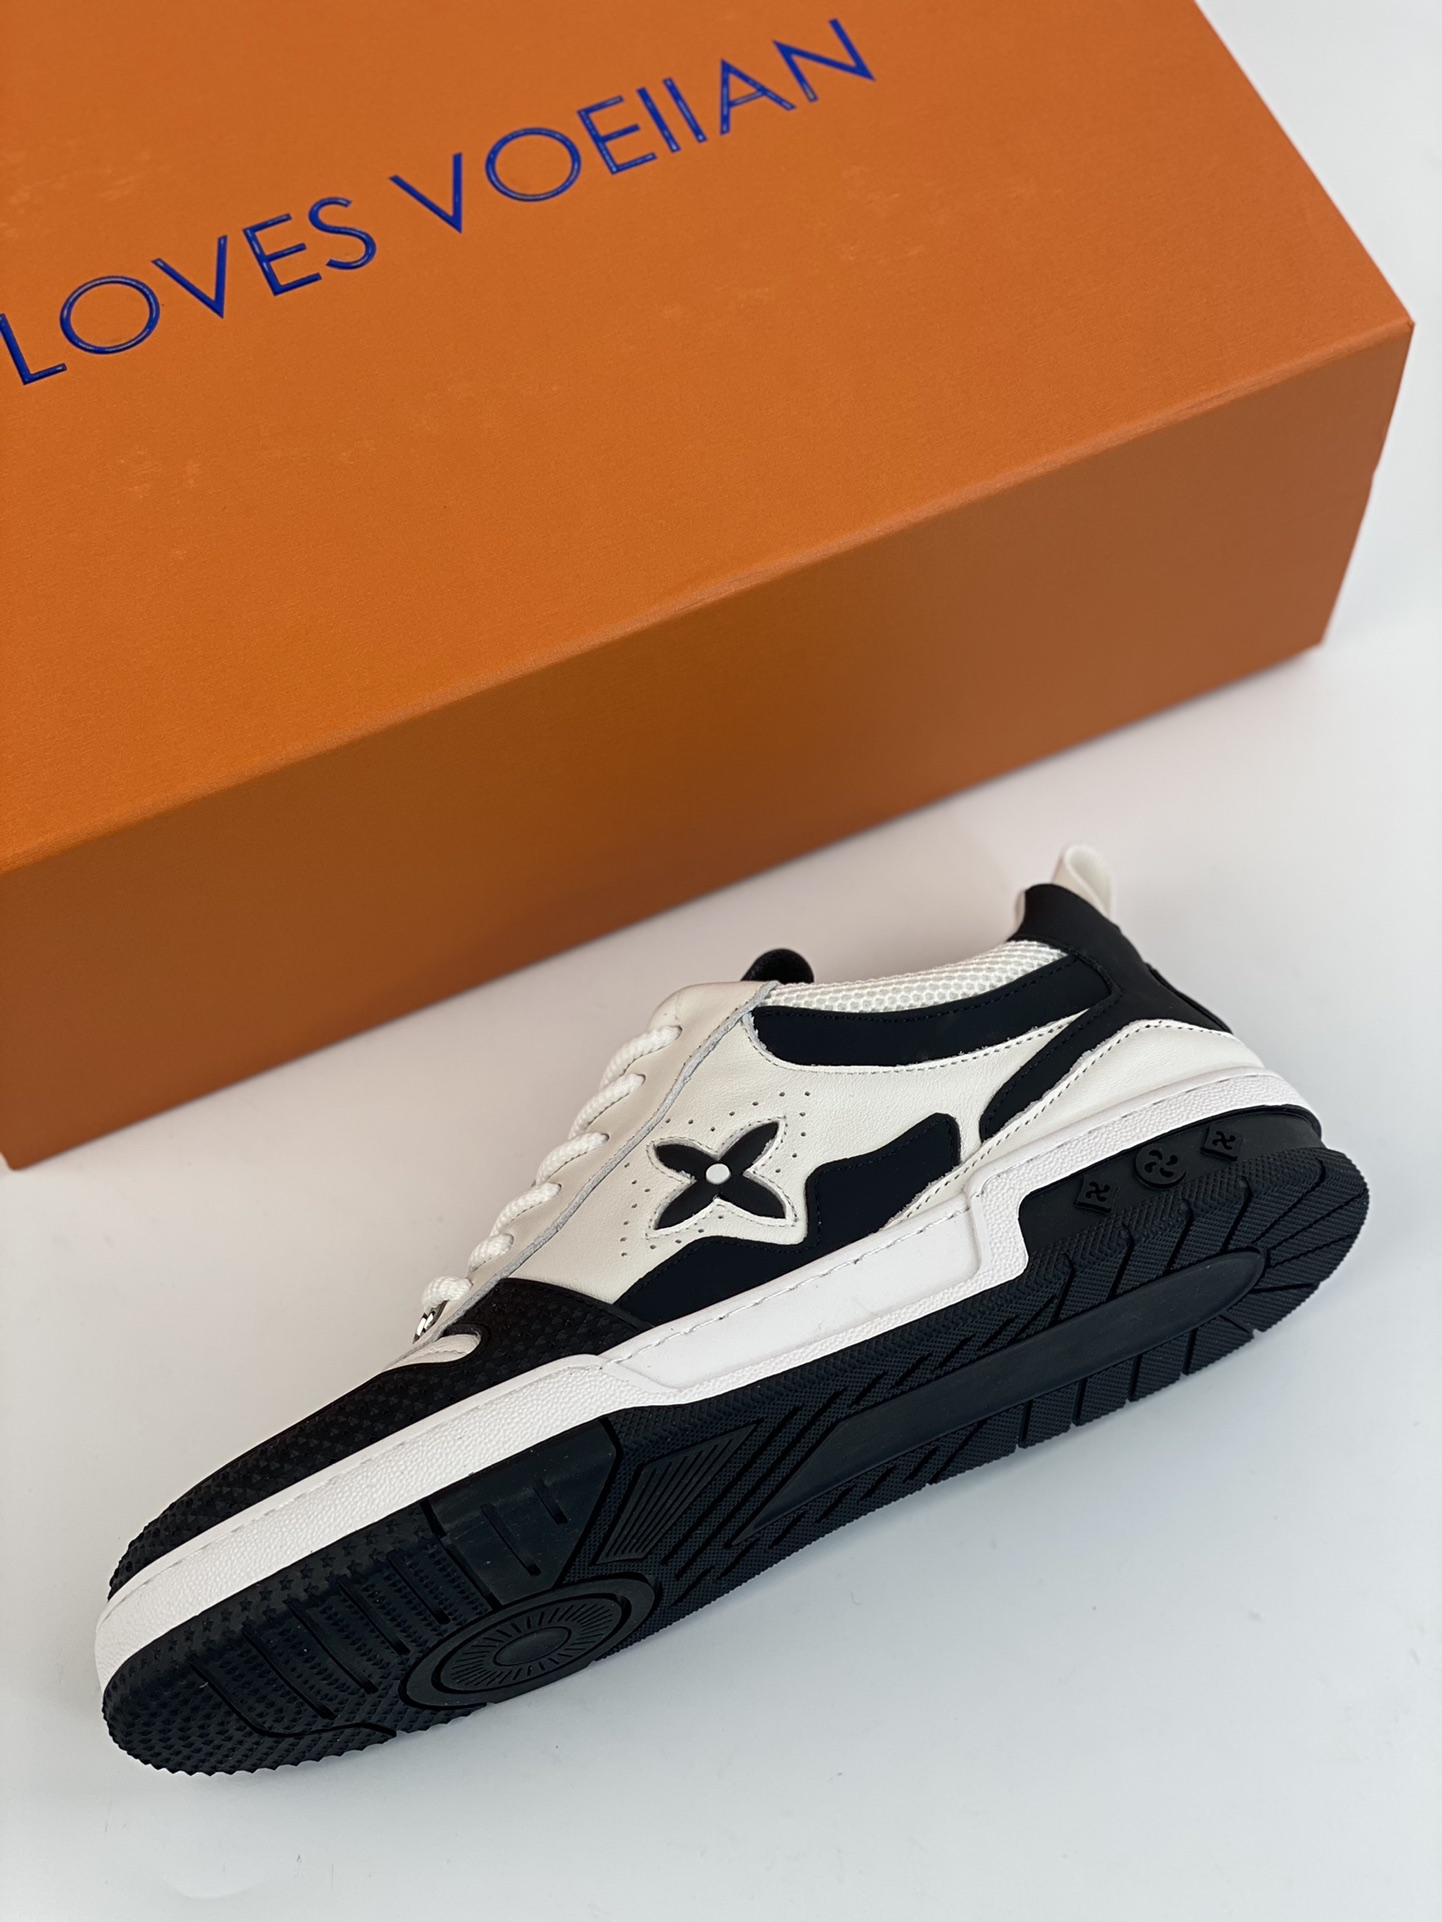 LV 23ss Trainer Sneaker casual sports shoes